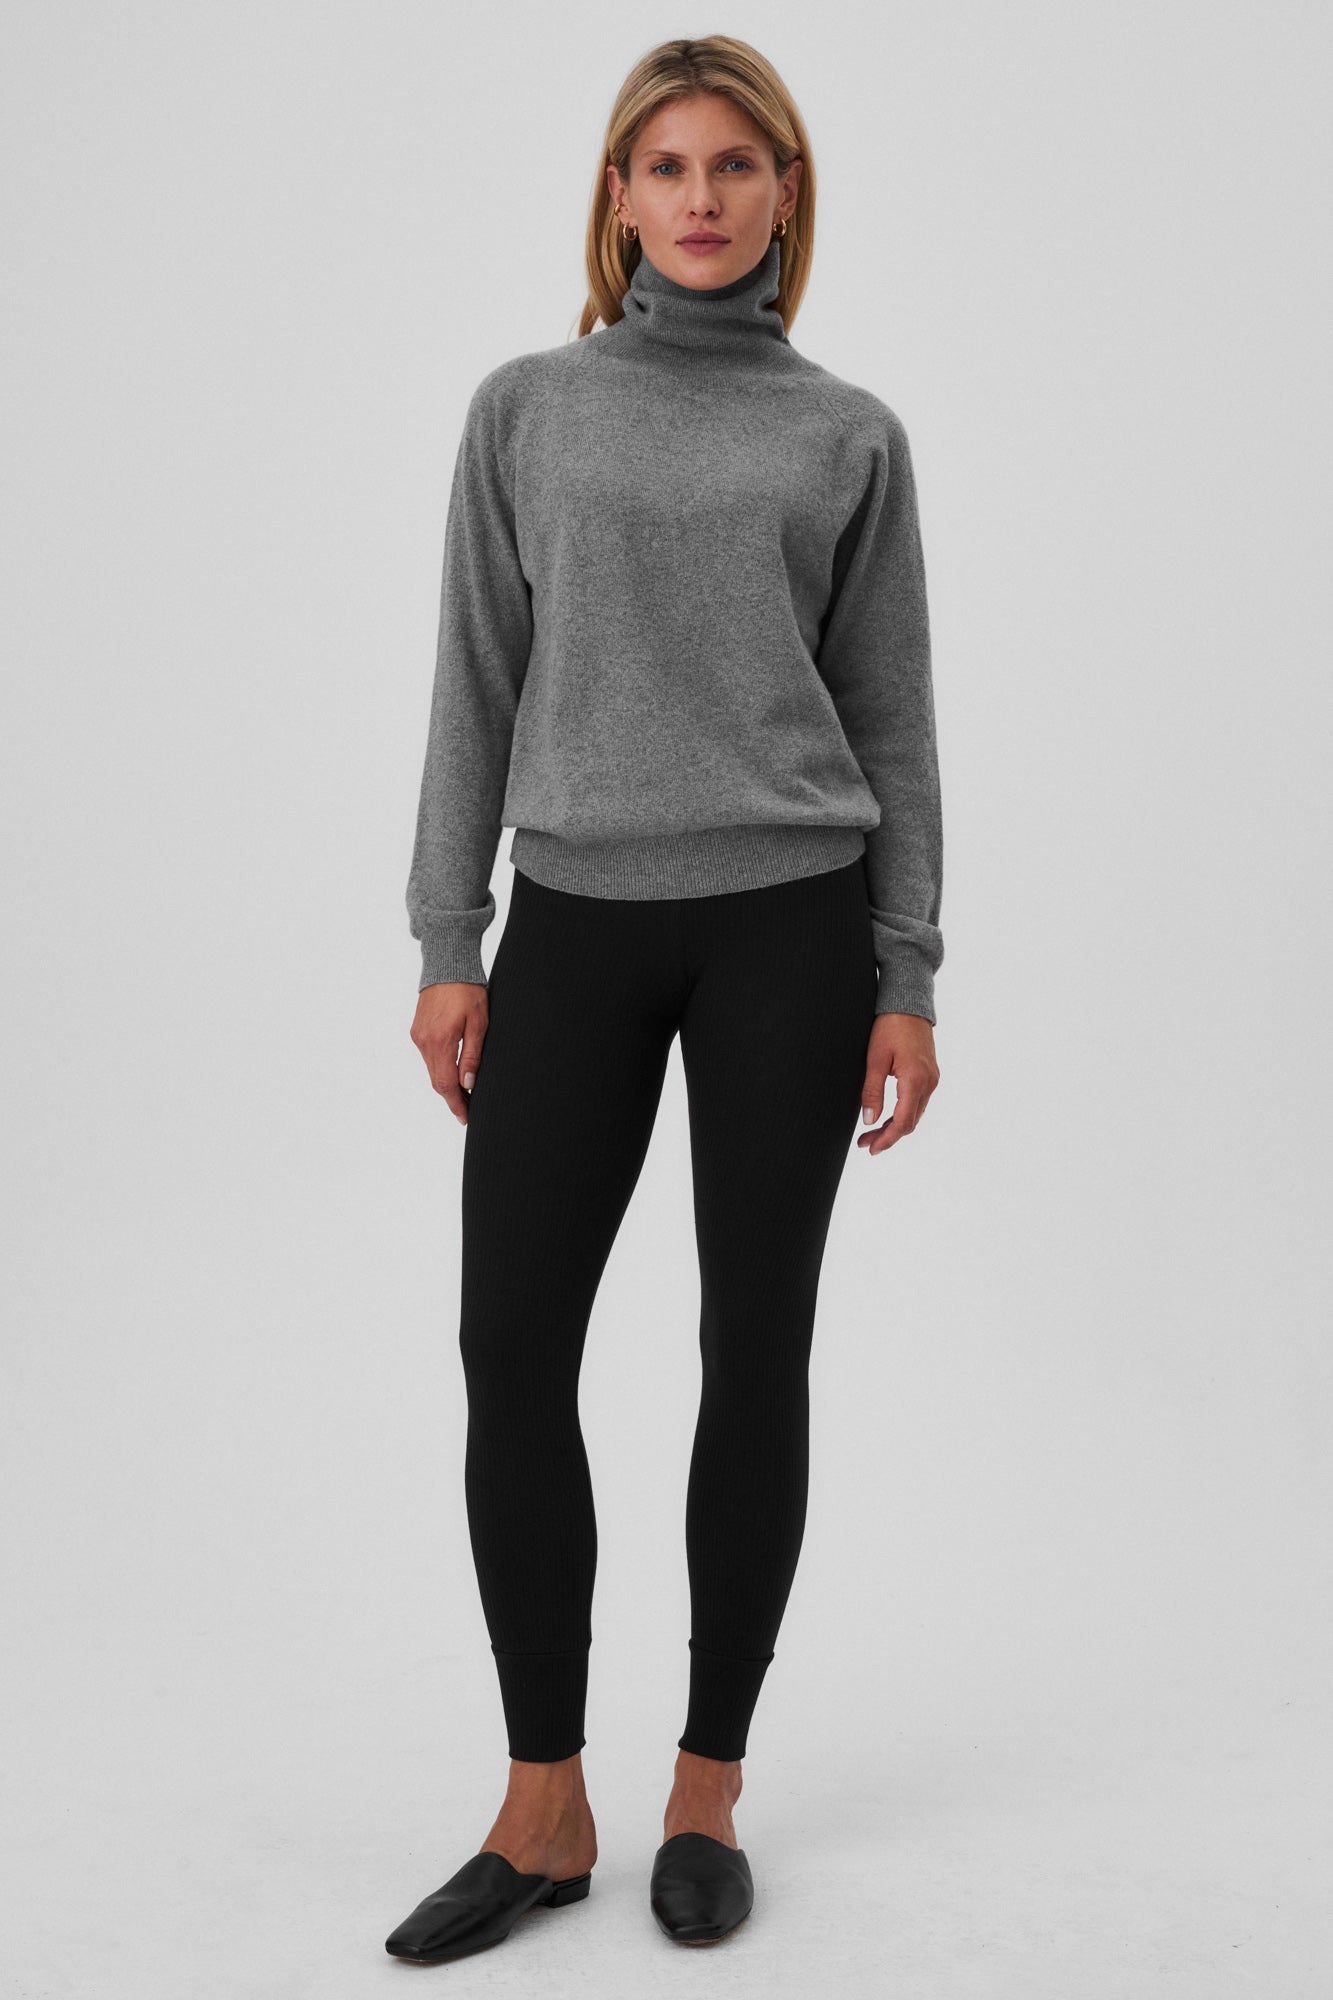 Leggings in organic cotton / 04 / 01 / onyx black *sweater-in-cashmere-16-13-grey-stone* ?The model is 177cm tall and wears size S? |